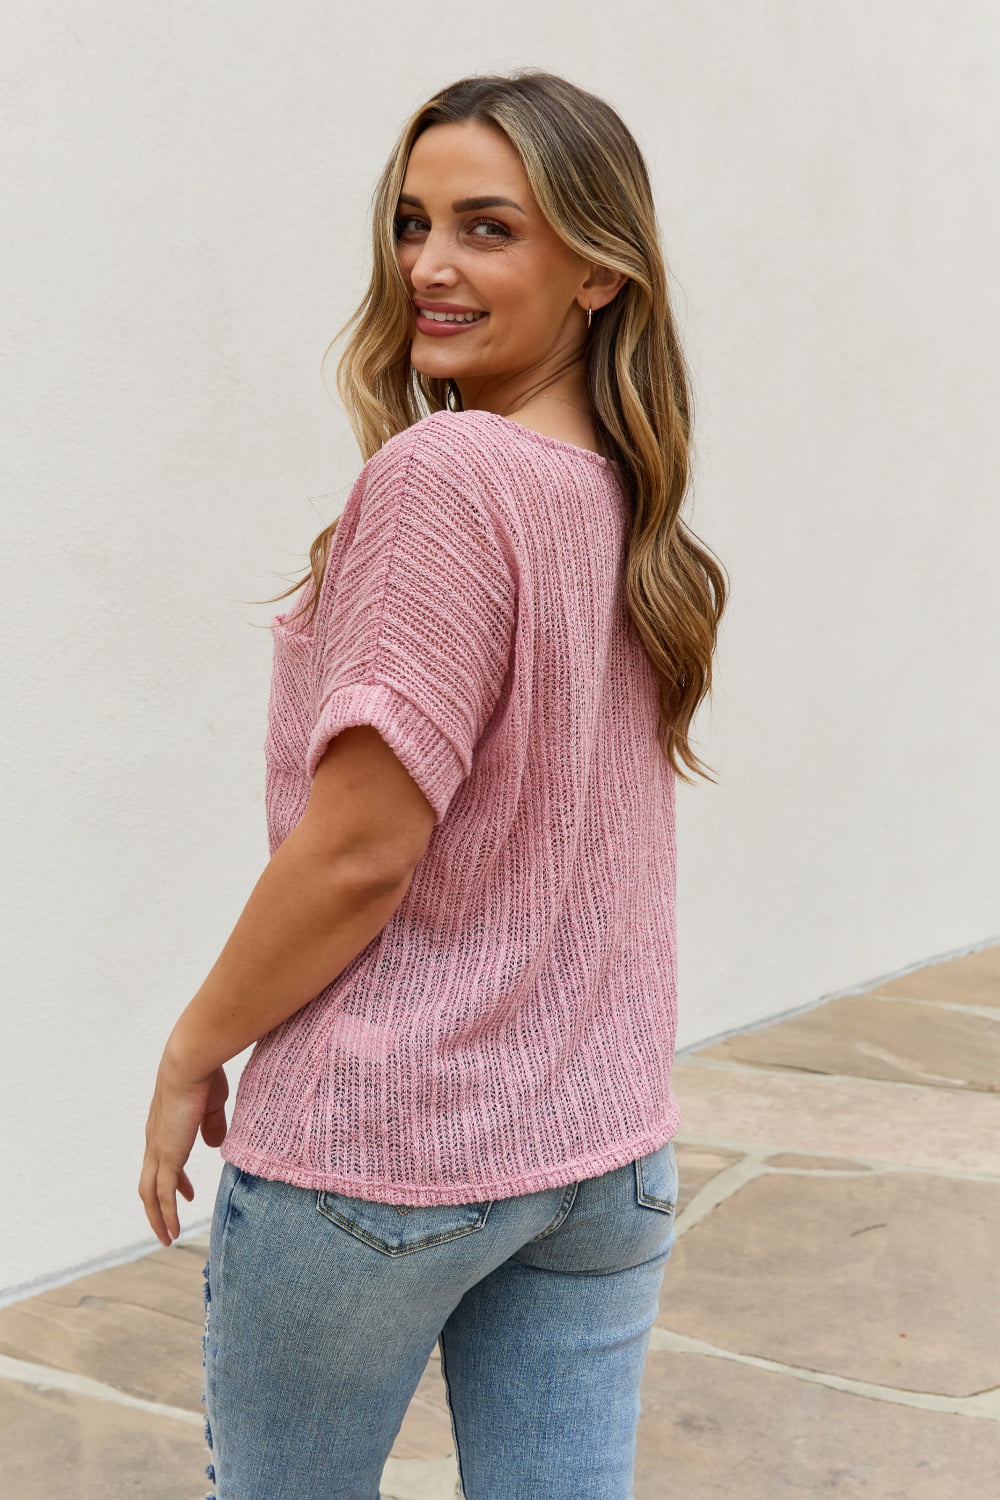 Chunky Knit Short Sleeve Top in Mauve - Camis & Tops - Shirts & Tops - 2 - 2024